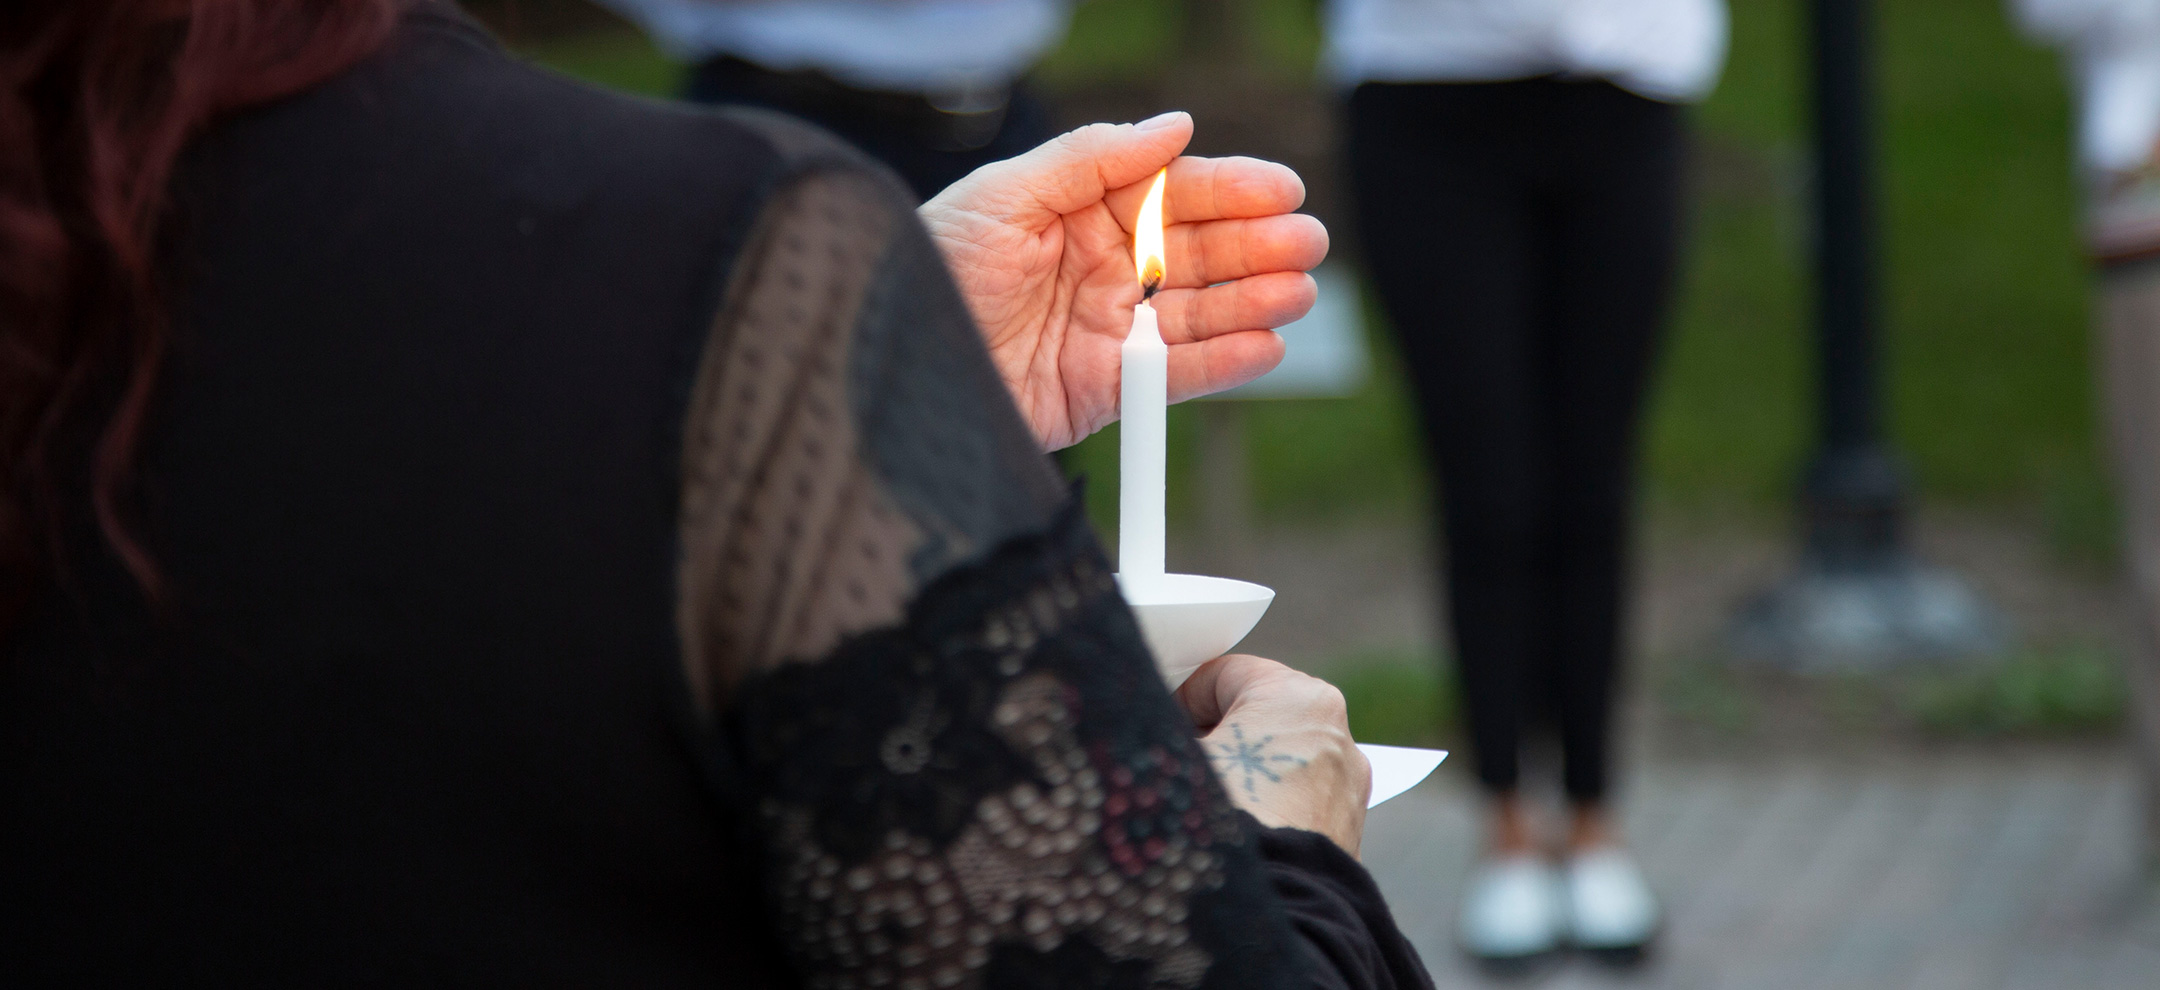 Individual in a black shirt is shown holding a candle at a candlelight vigil